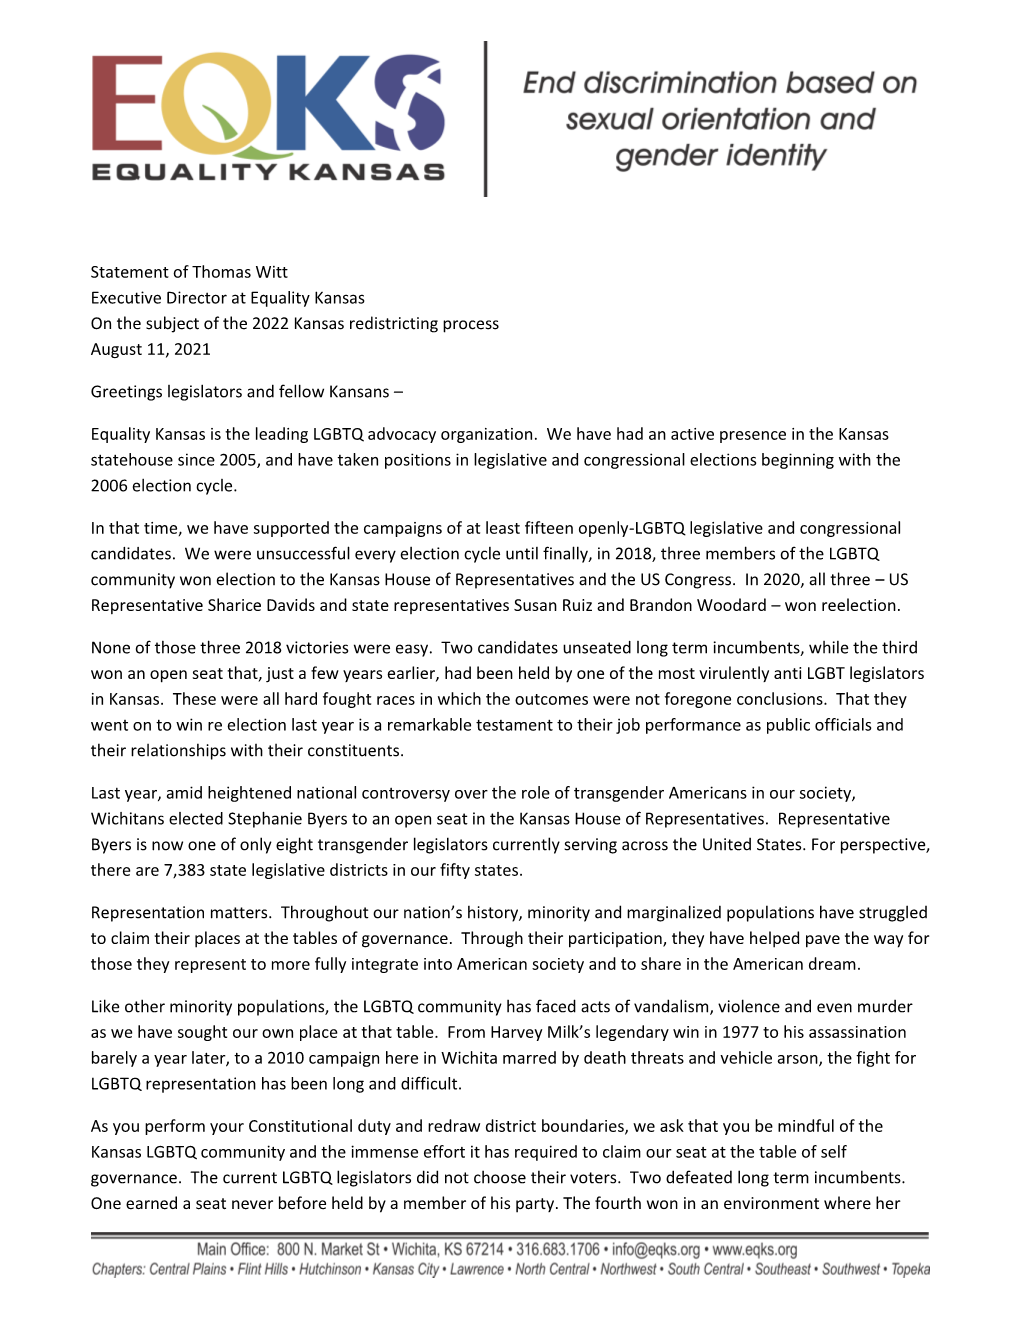 Statement of Thomas Witt Executive Director at Equality Kansas on the Subject of the 2022 Kansas Redistricting Process August 11, 2021